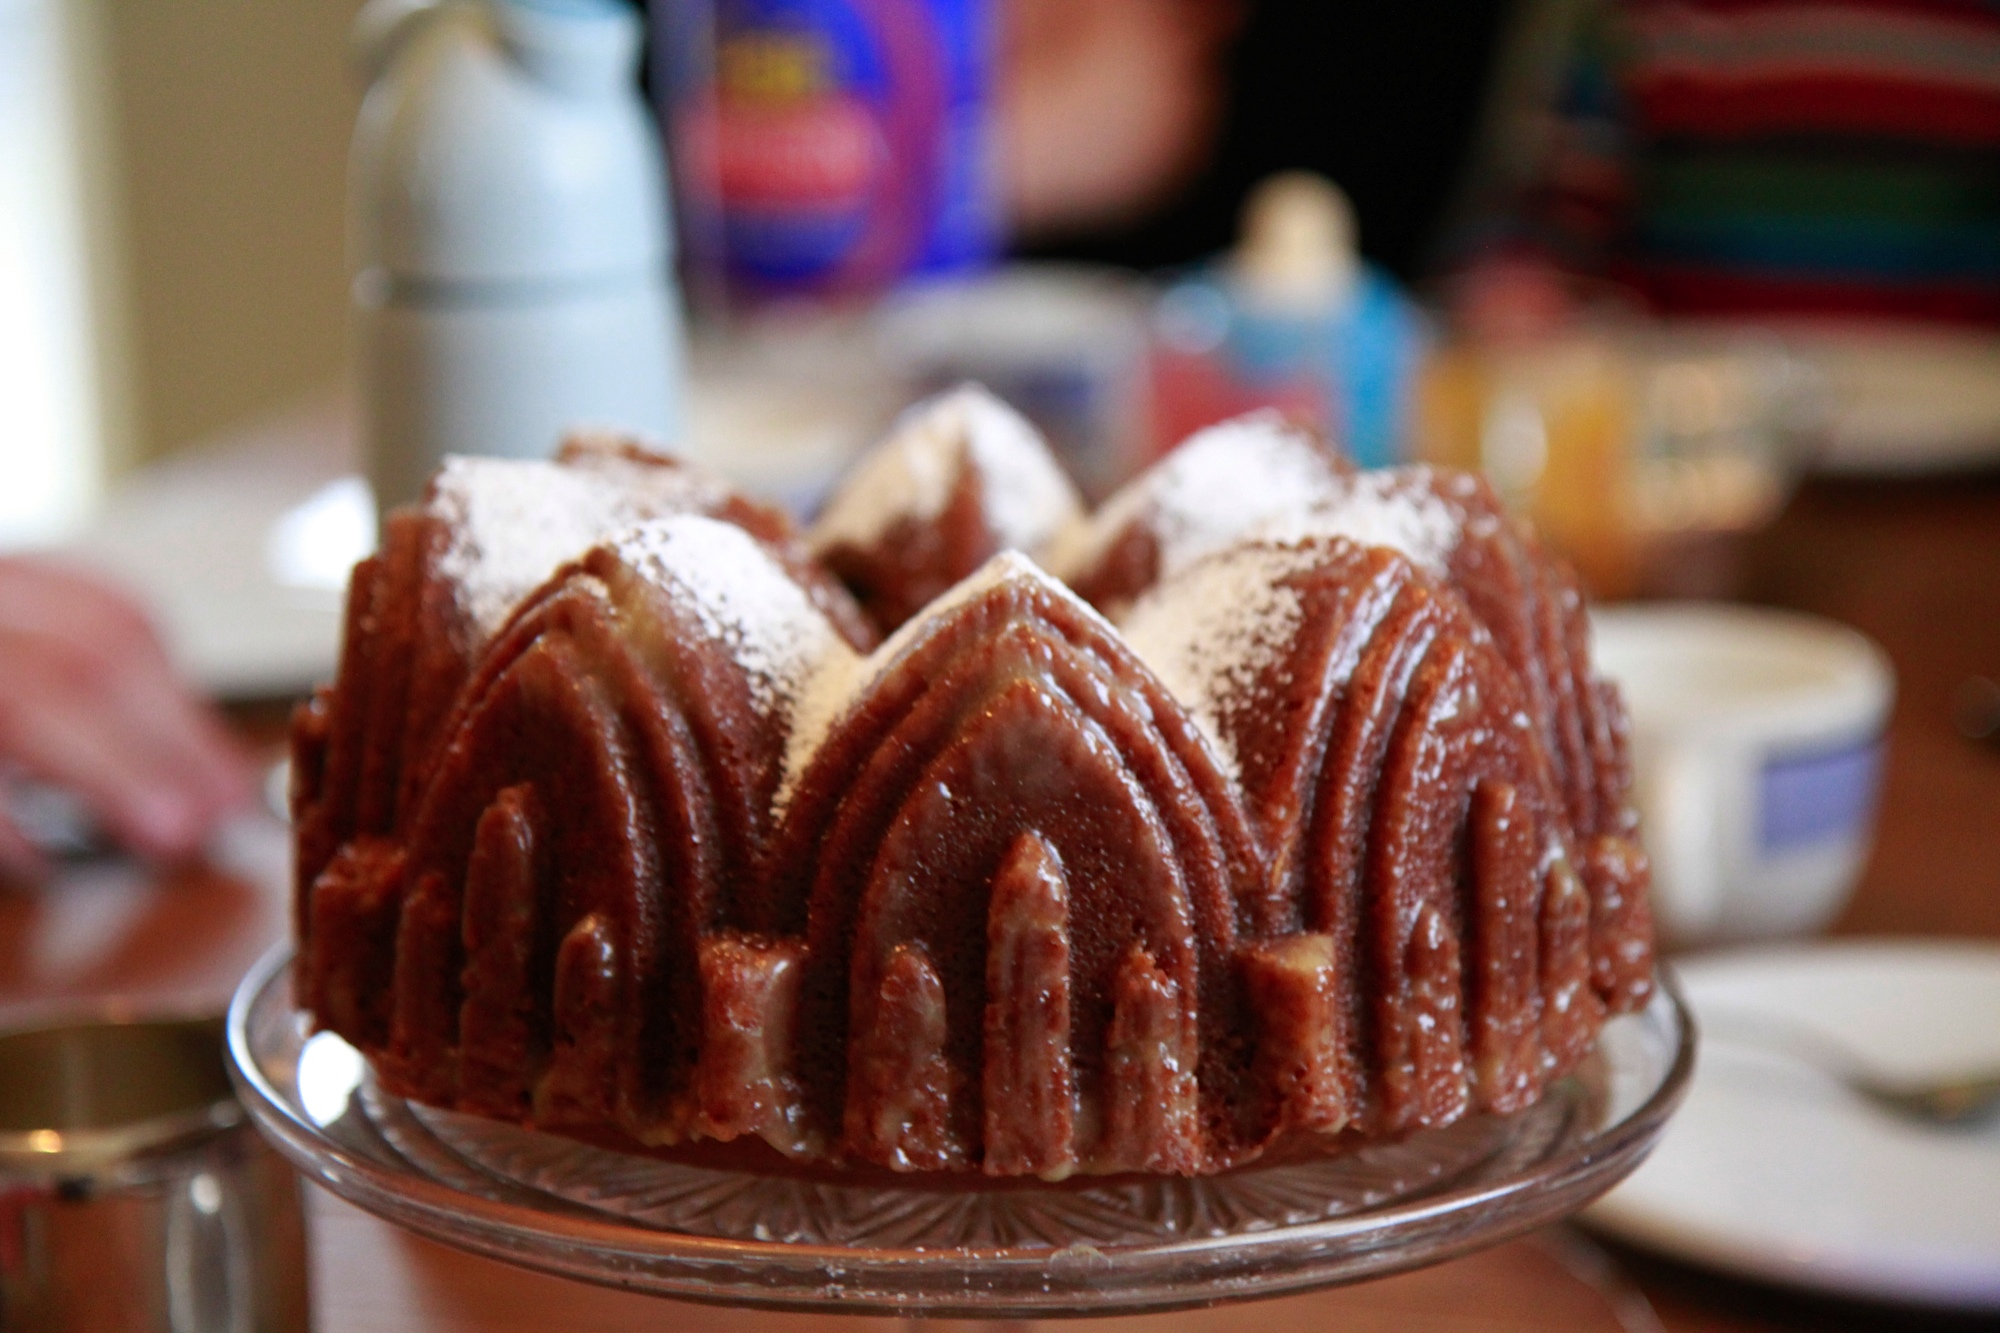 Best bundt cake tins tried and tested 2020 | Good Food